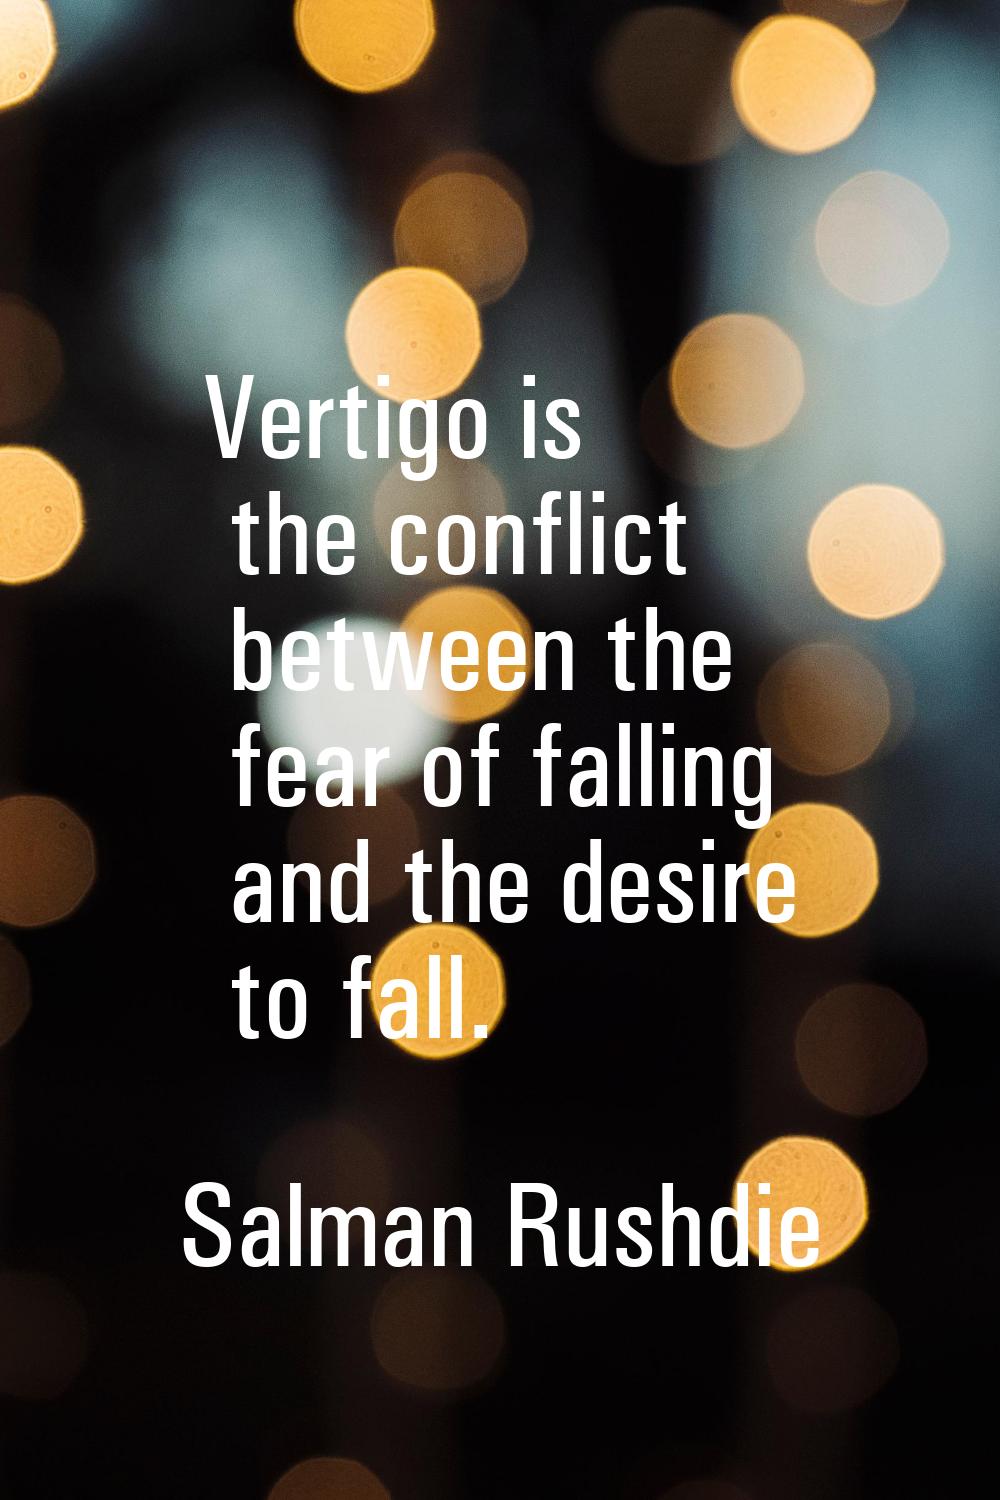 Vertigo is the conflict between the fear of falling and the desire to fall.